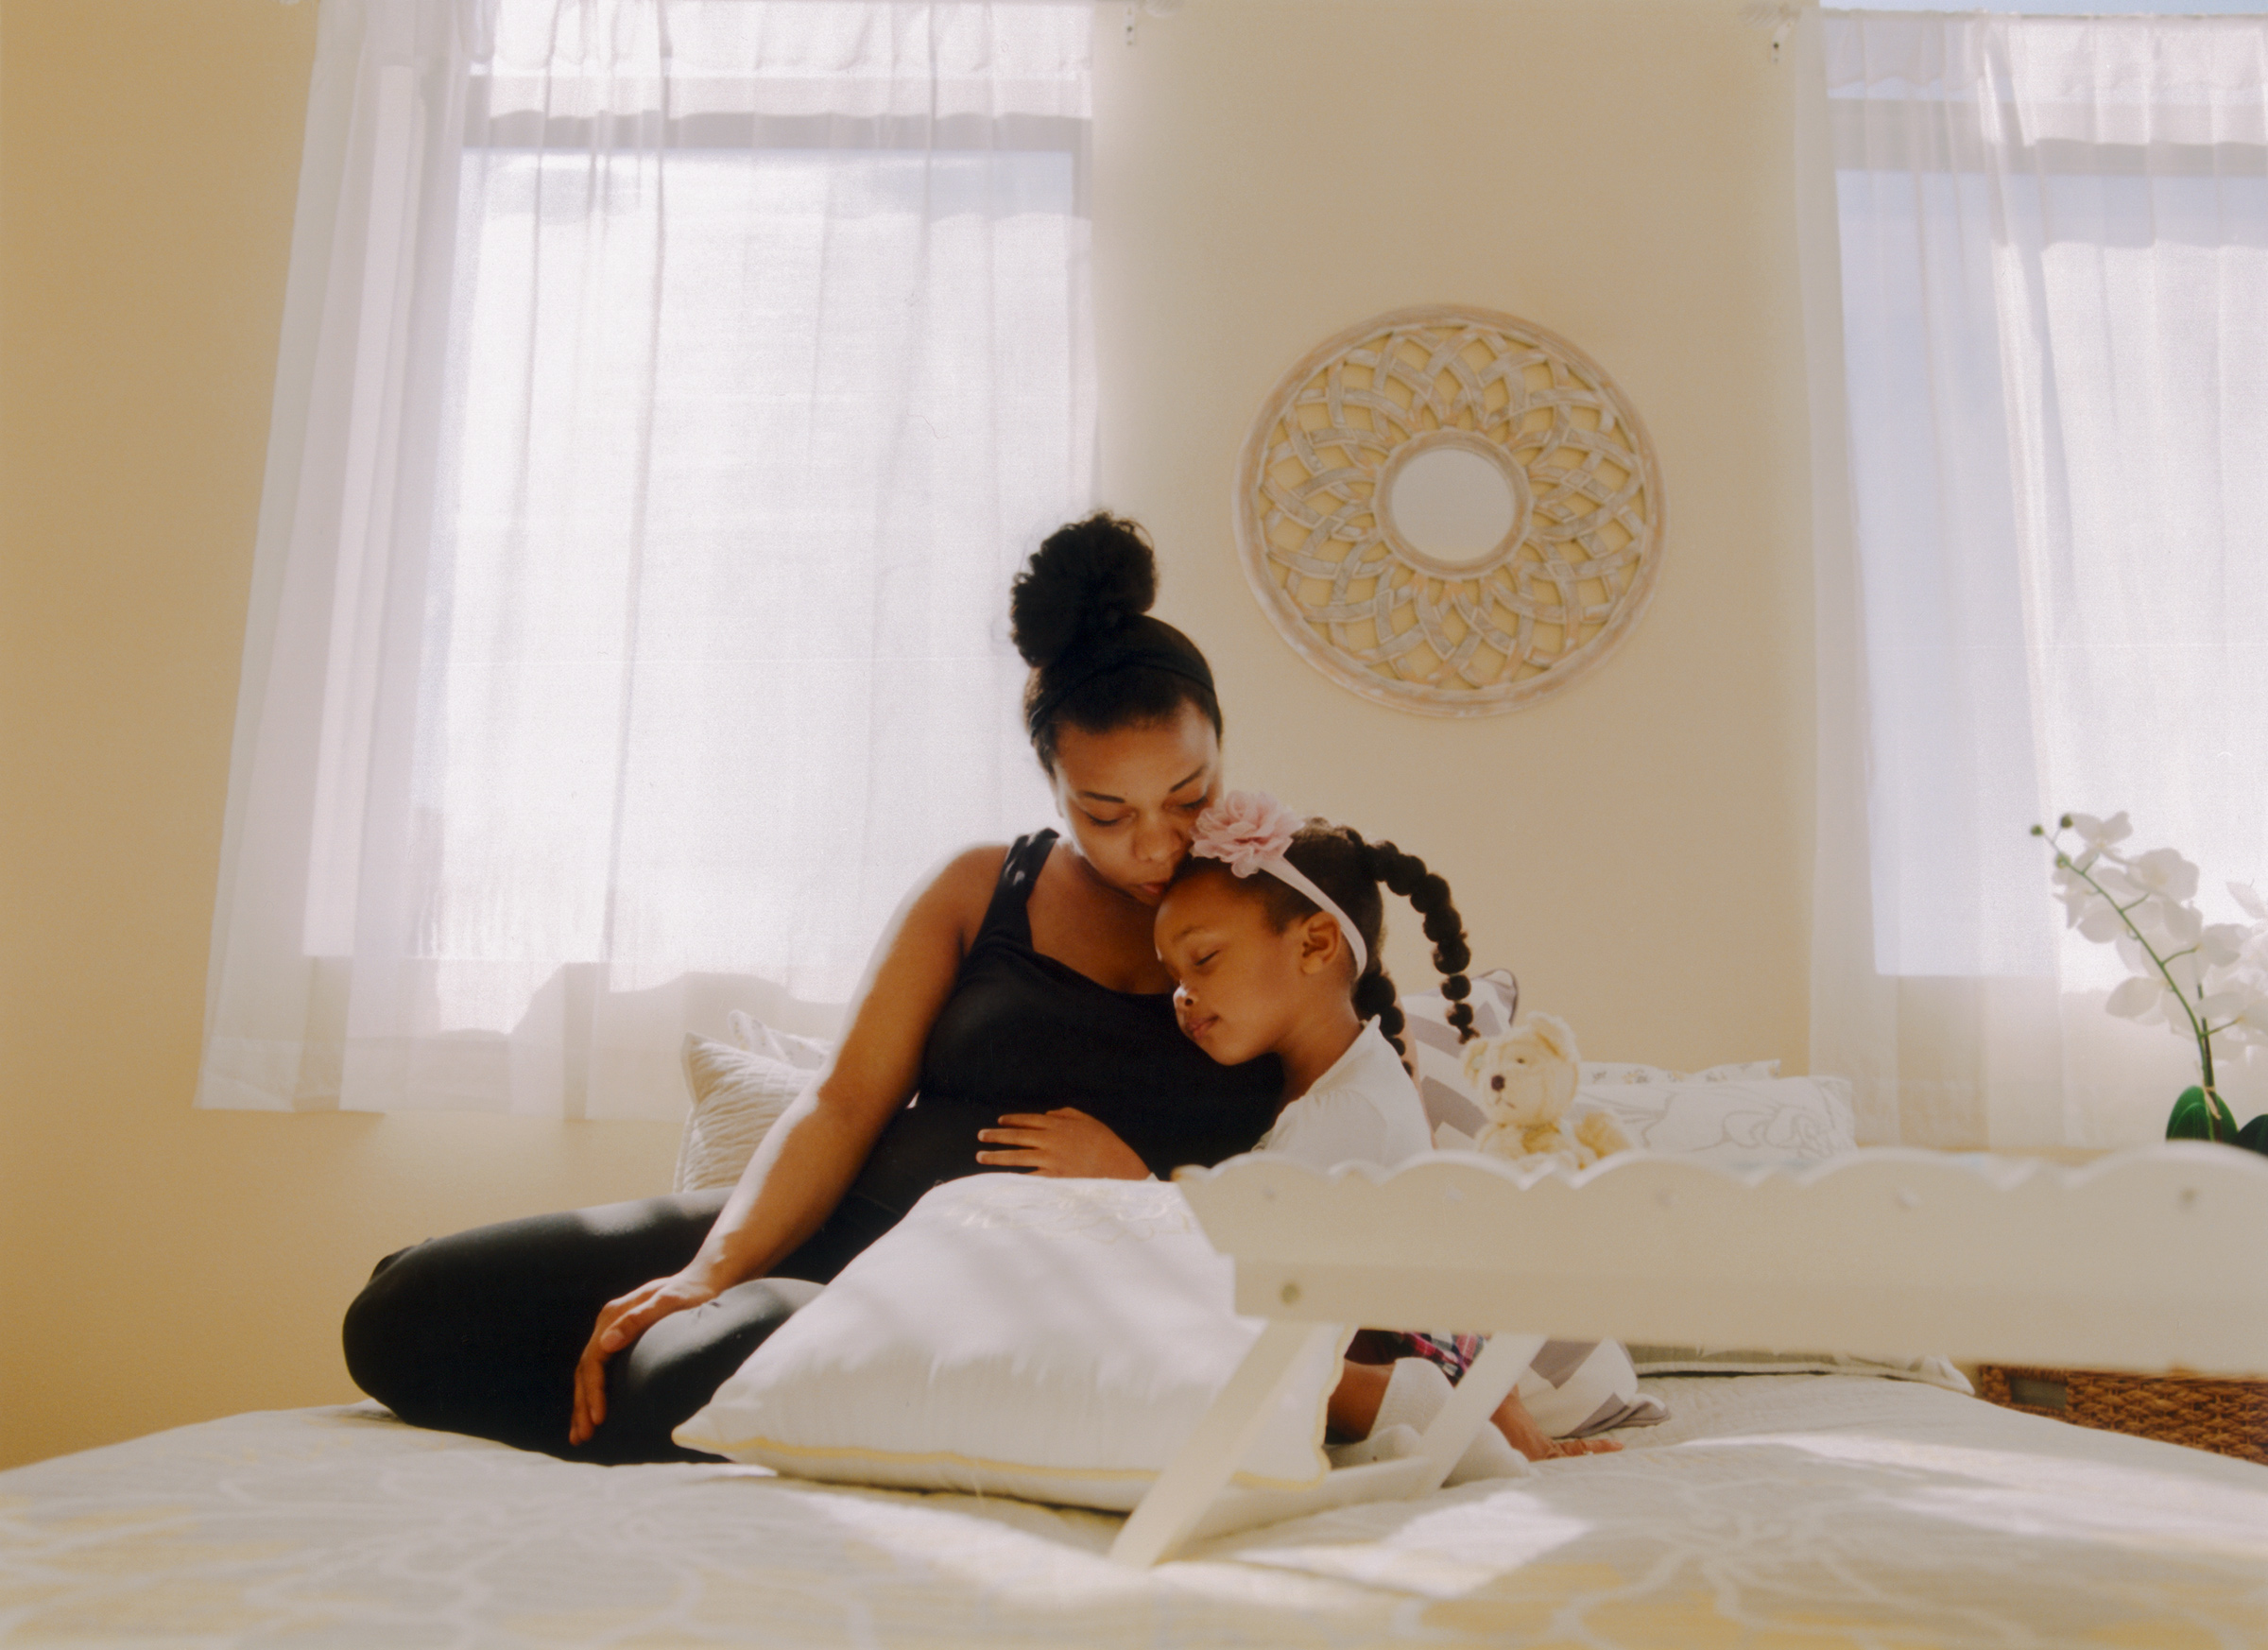 Drummond gave birth to her daughter Aria in one of Joseph’s two birthing rooms and delivered her son in the other (Myesha Evon Gardner for TIME)